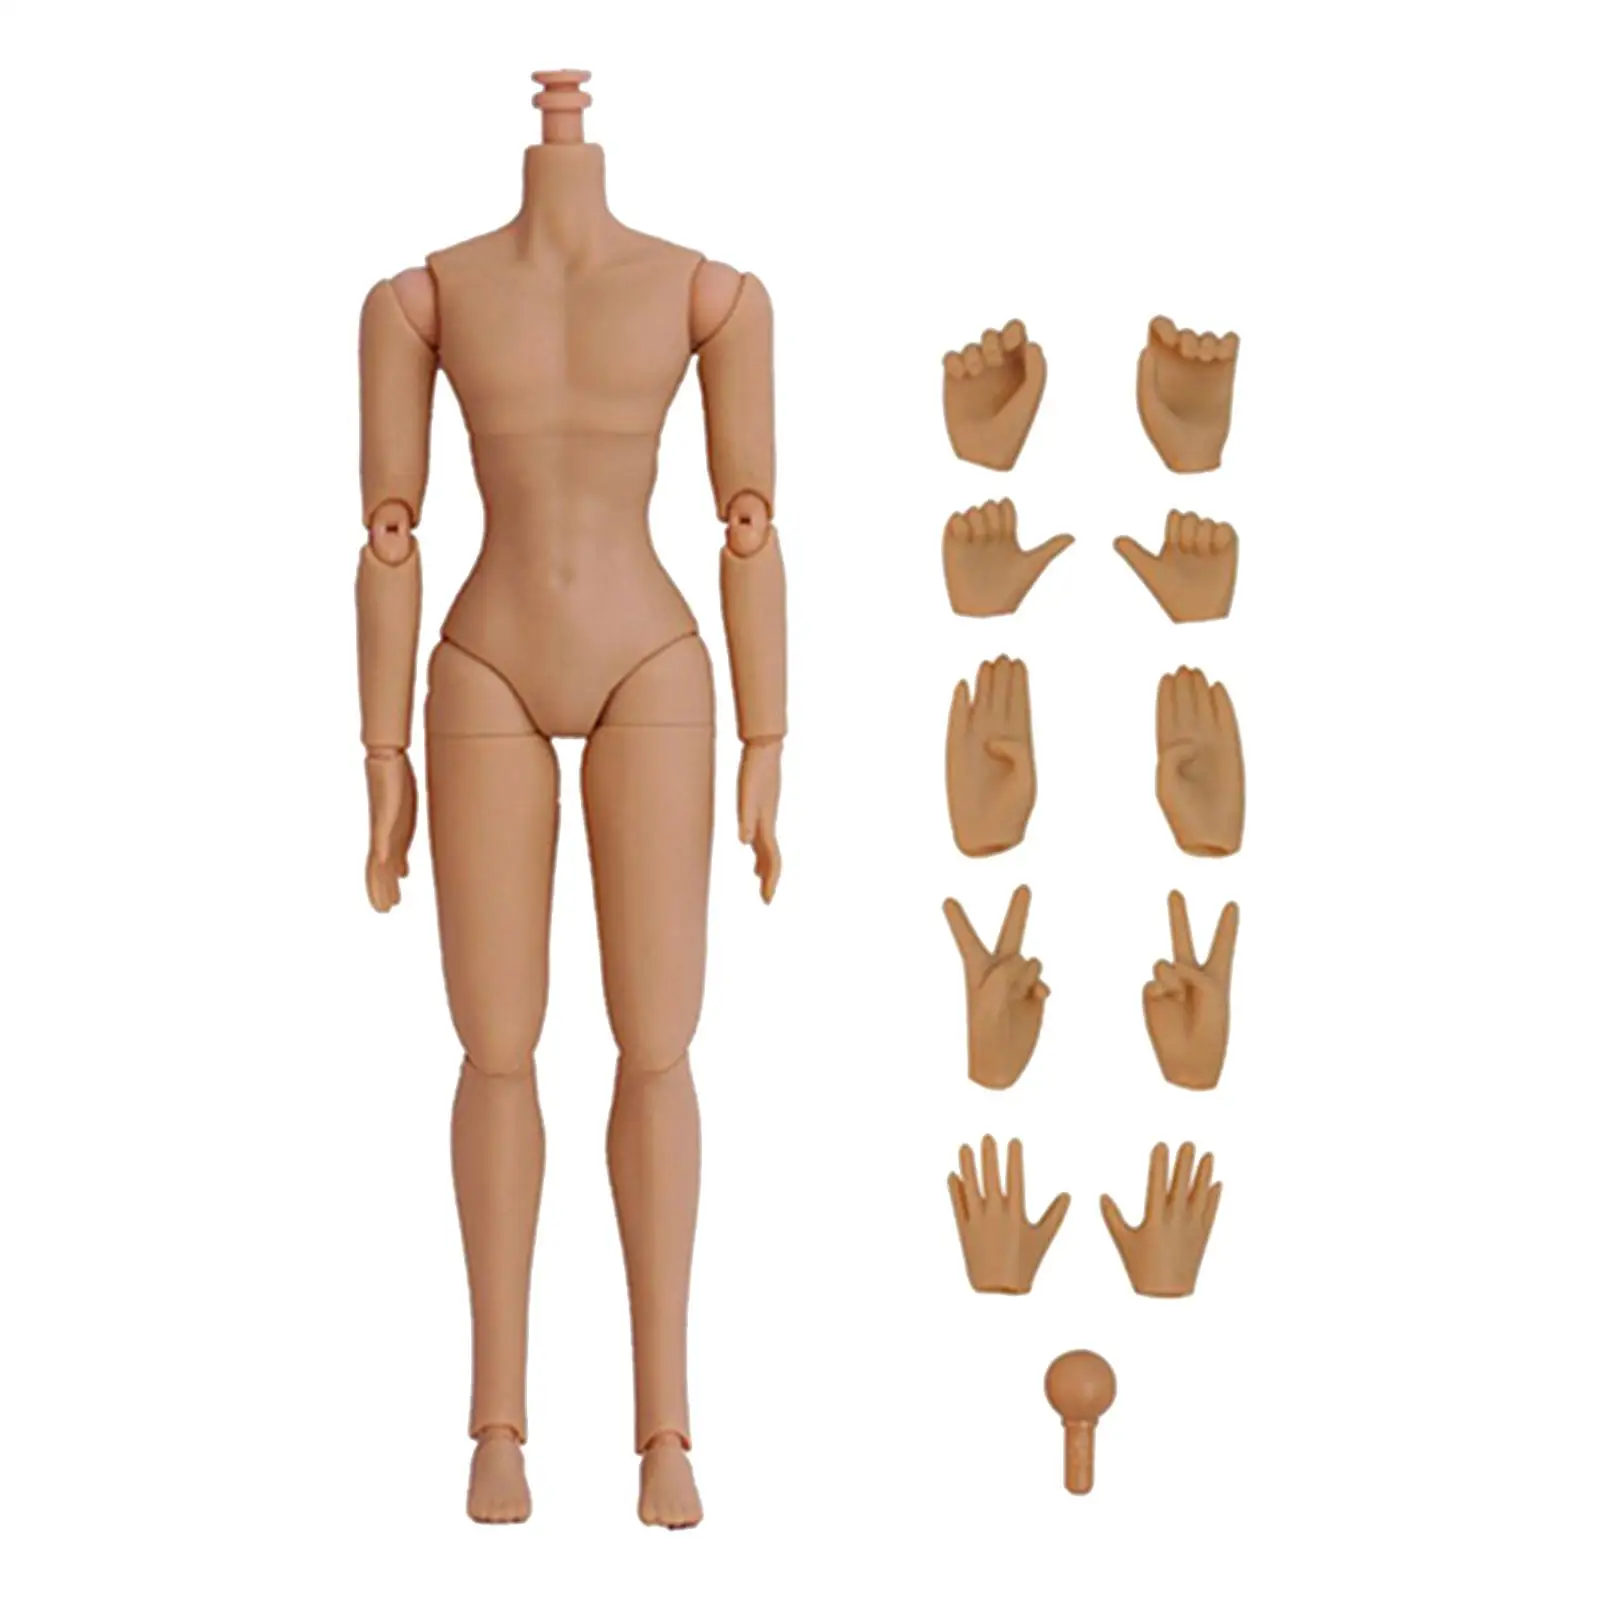 12 inch Jointed Doll Body Narrow Shoulder Without Head Toys Detachable DIY Miniature Collectible Flexible Realistic